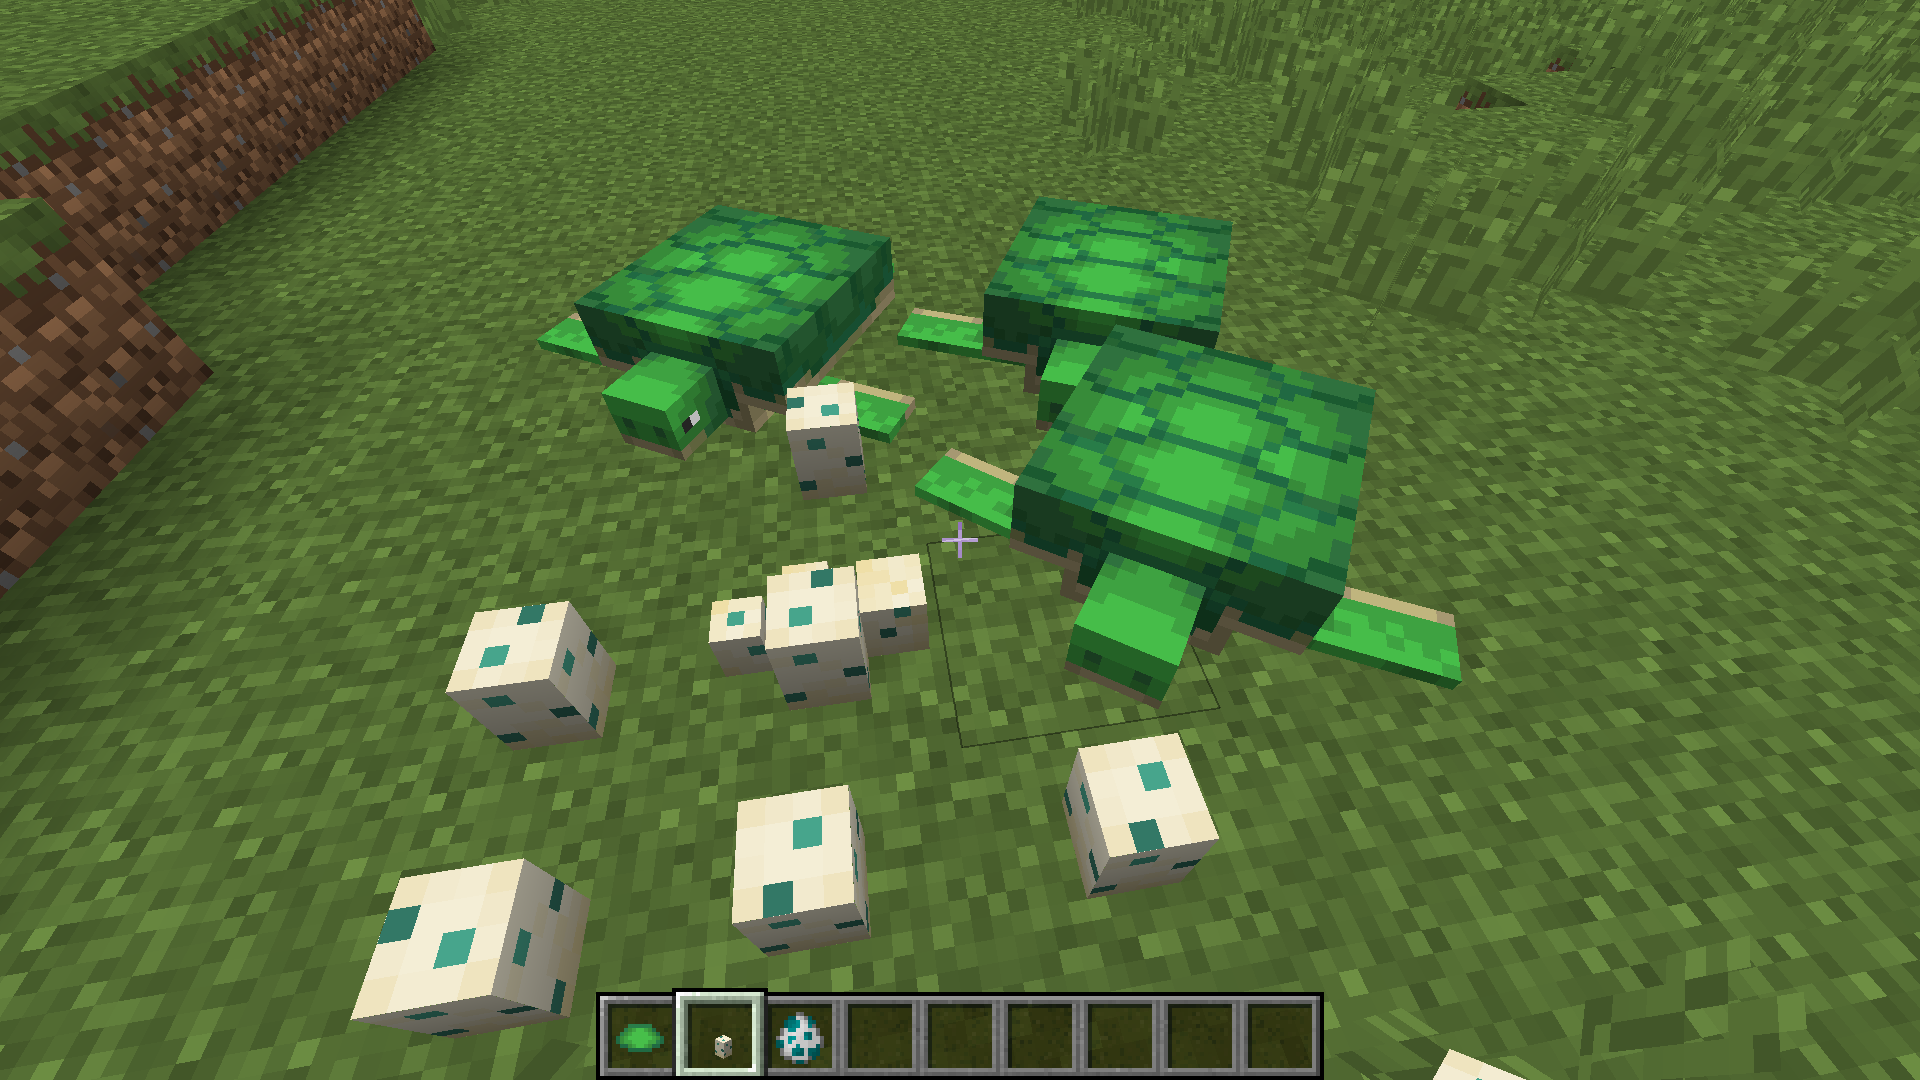 Turtles in the new version! : Minecraft